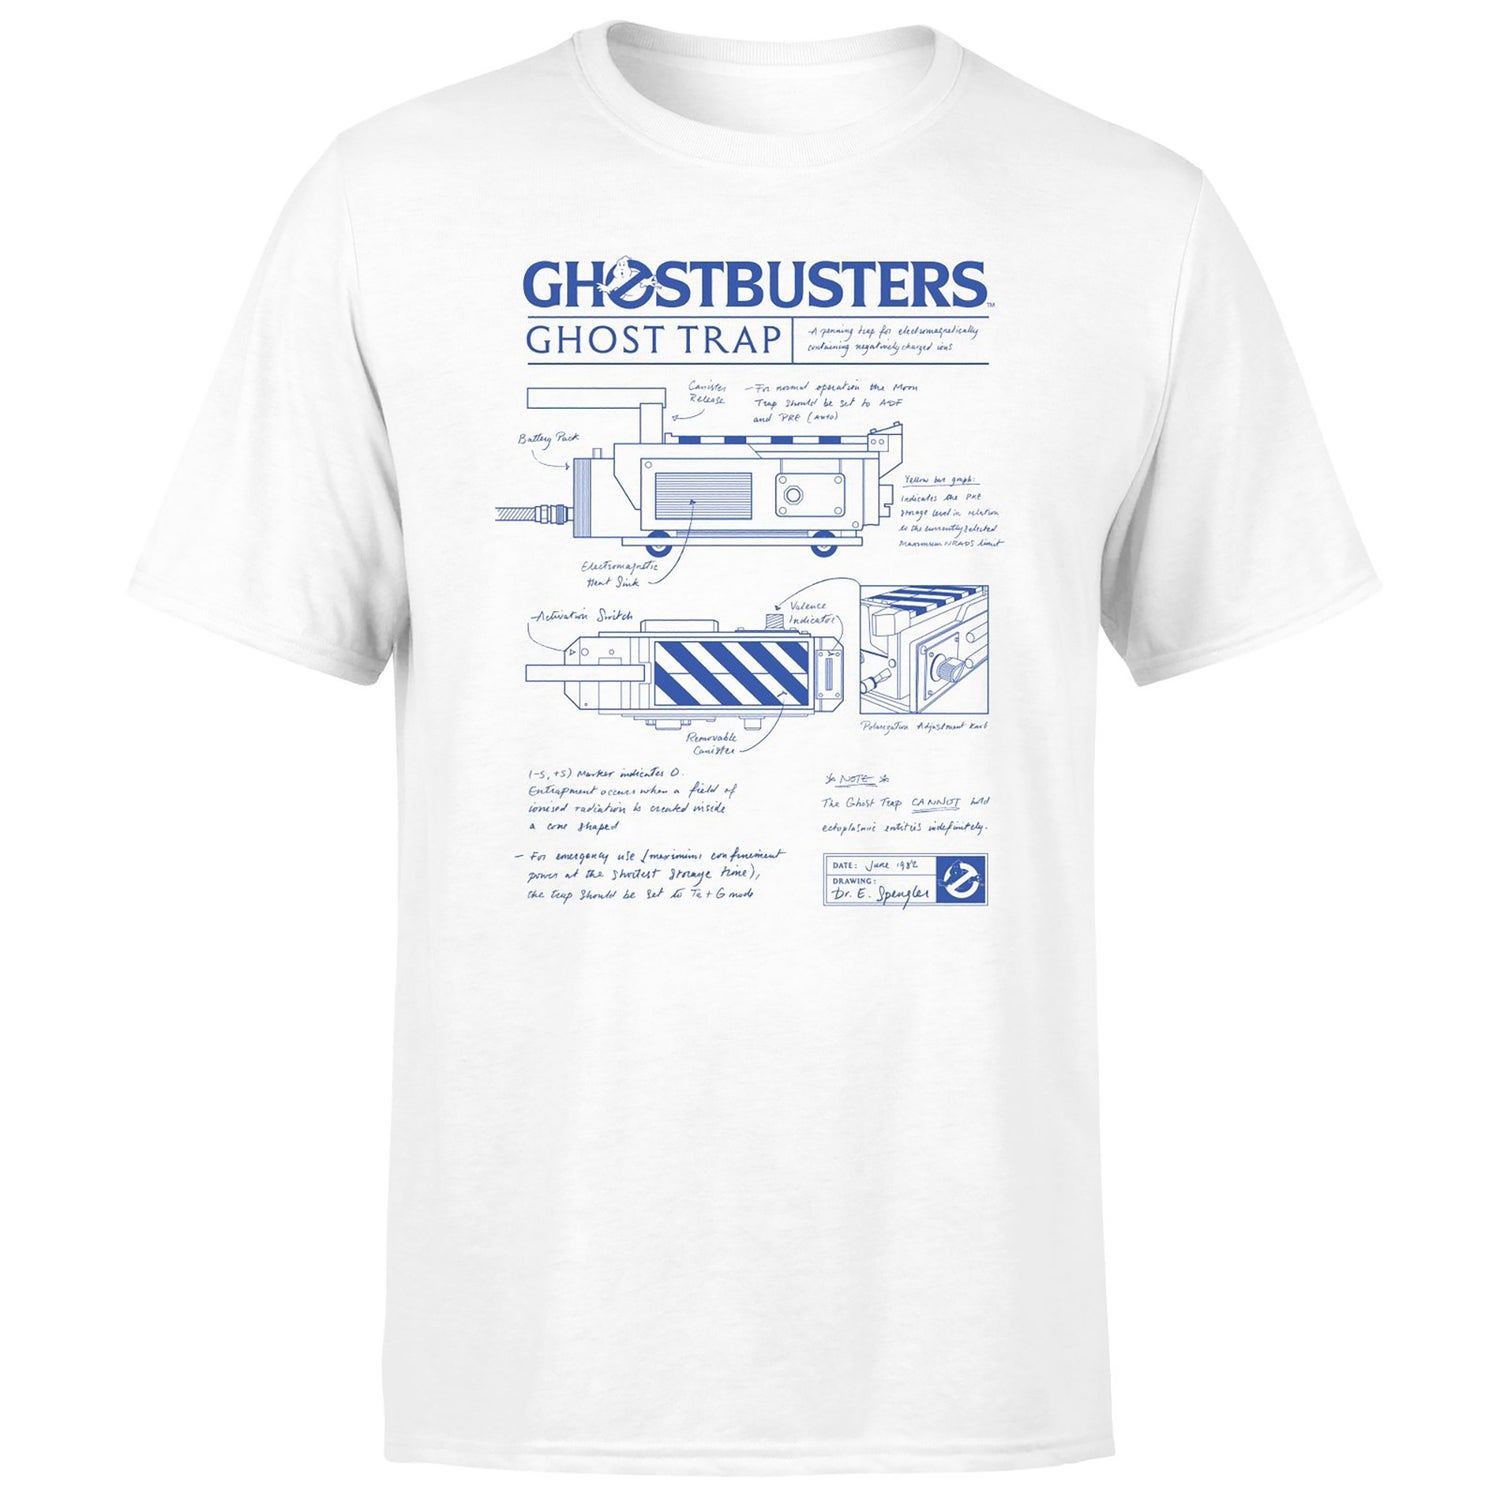 Ghostbusters Ghost Trap Schematic Men's T-Shirt - White